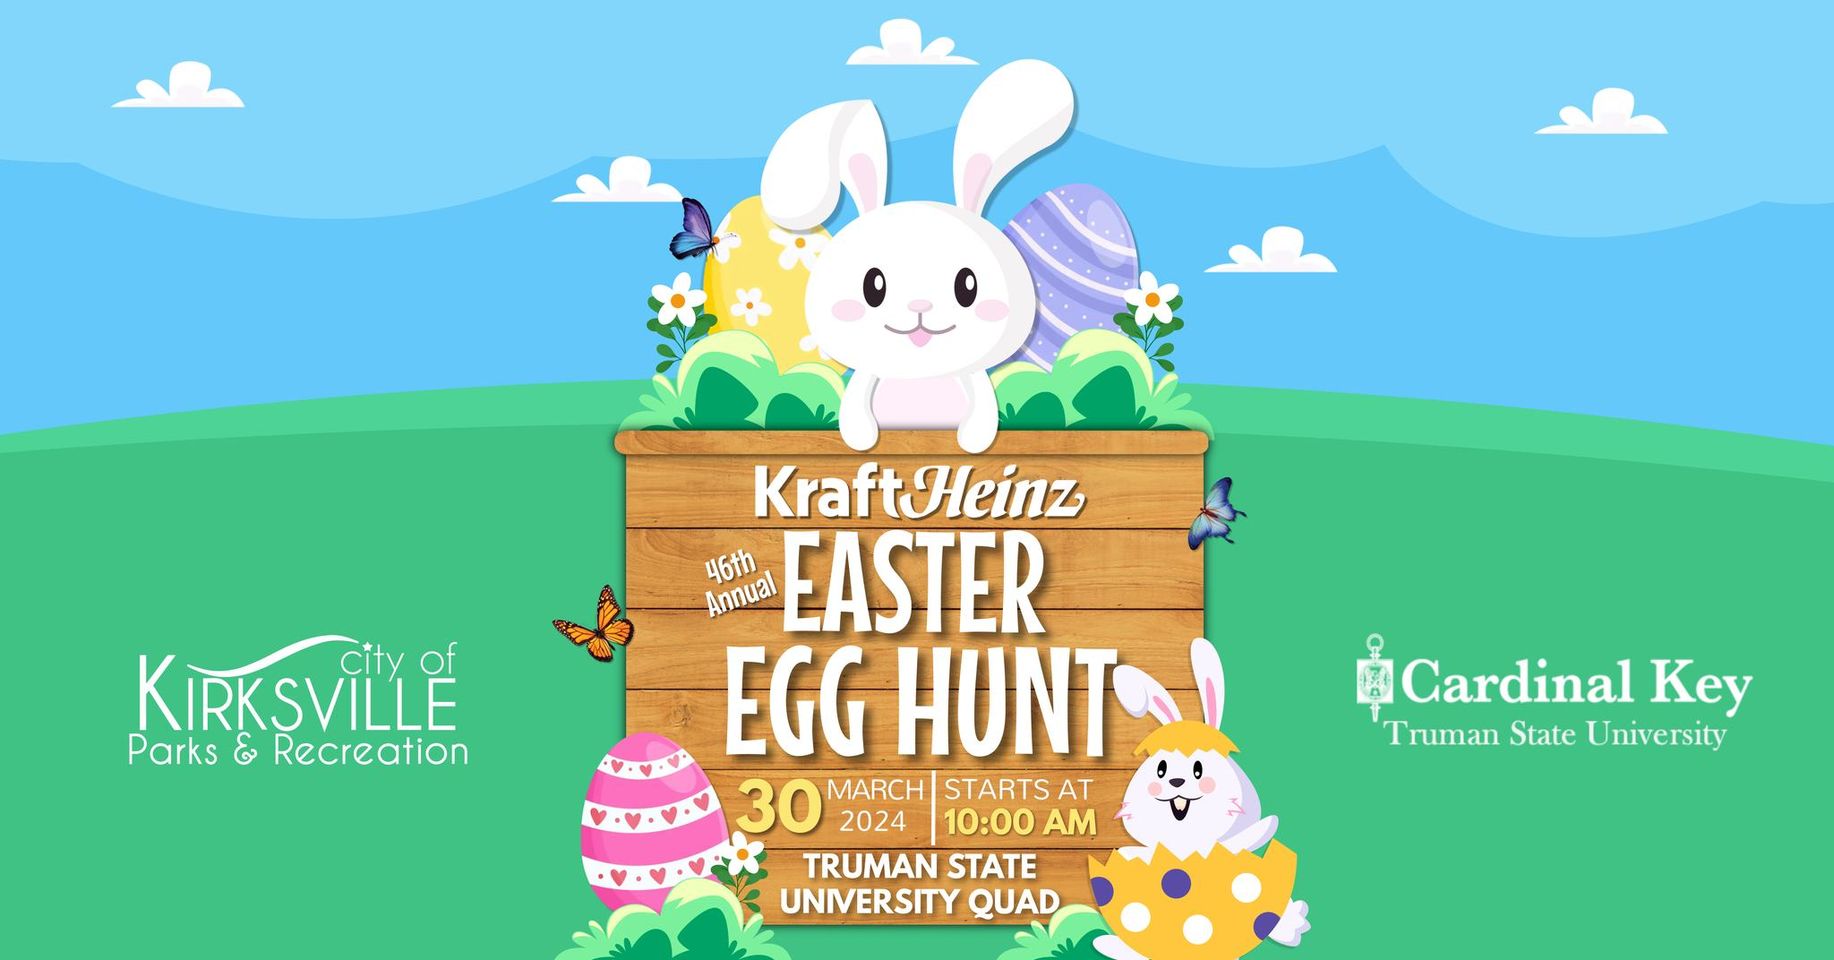 Check more about 46th Annual Children's Easter Egg Hunt